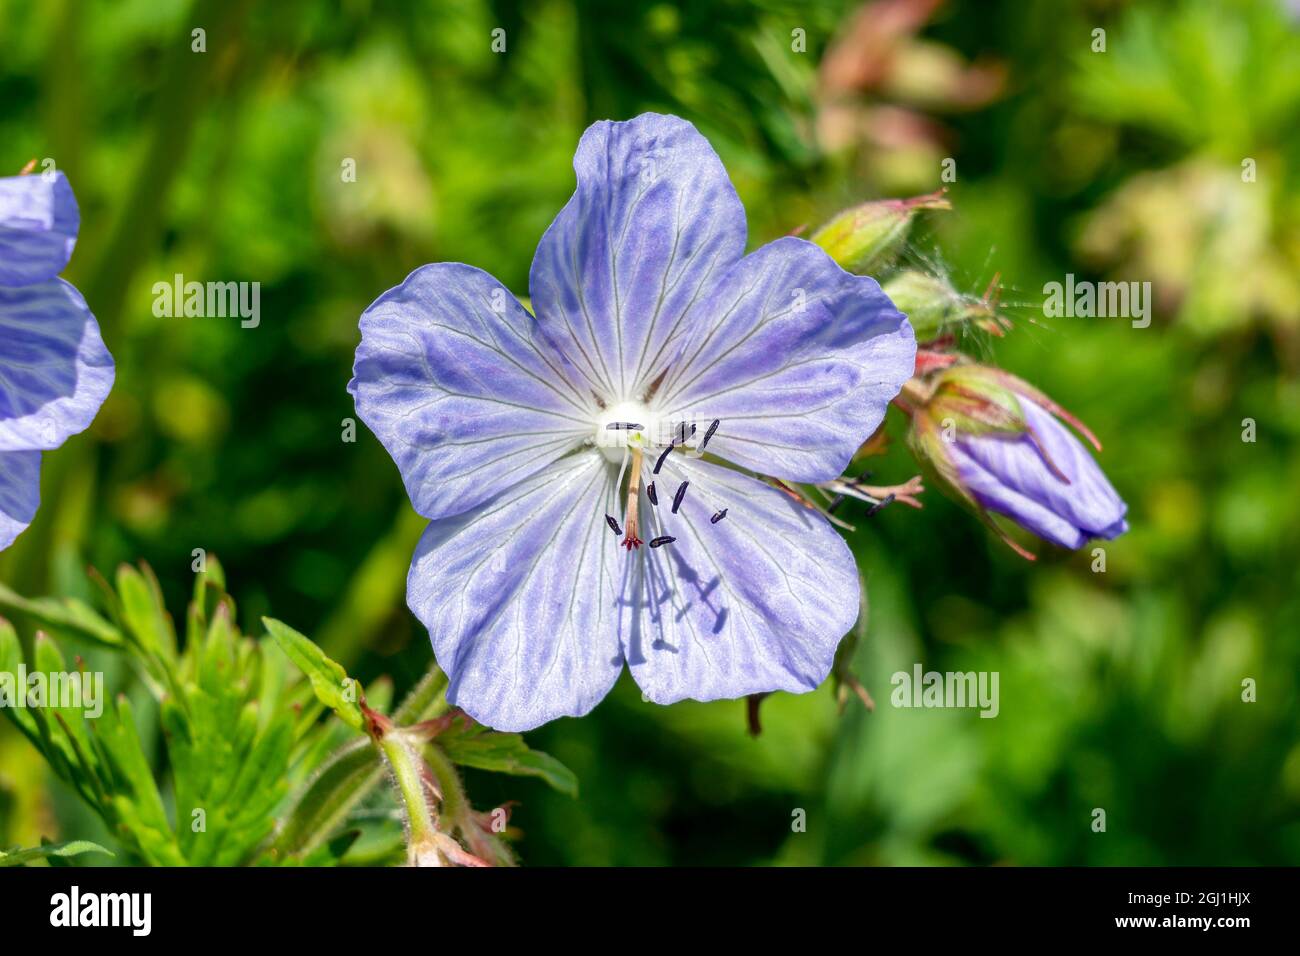 Geranium Pratense 'Mrs Kendall Clark' a summer flowering plant with a light purple summertime flower commonly known as meadow cranesbill, stock photo Stock Photo